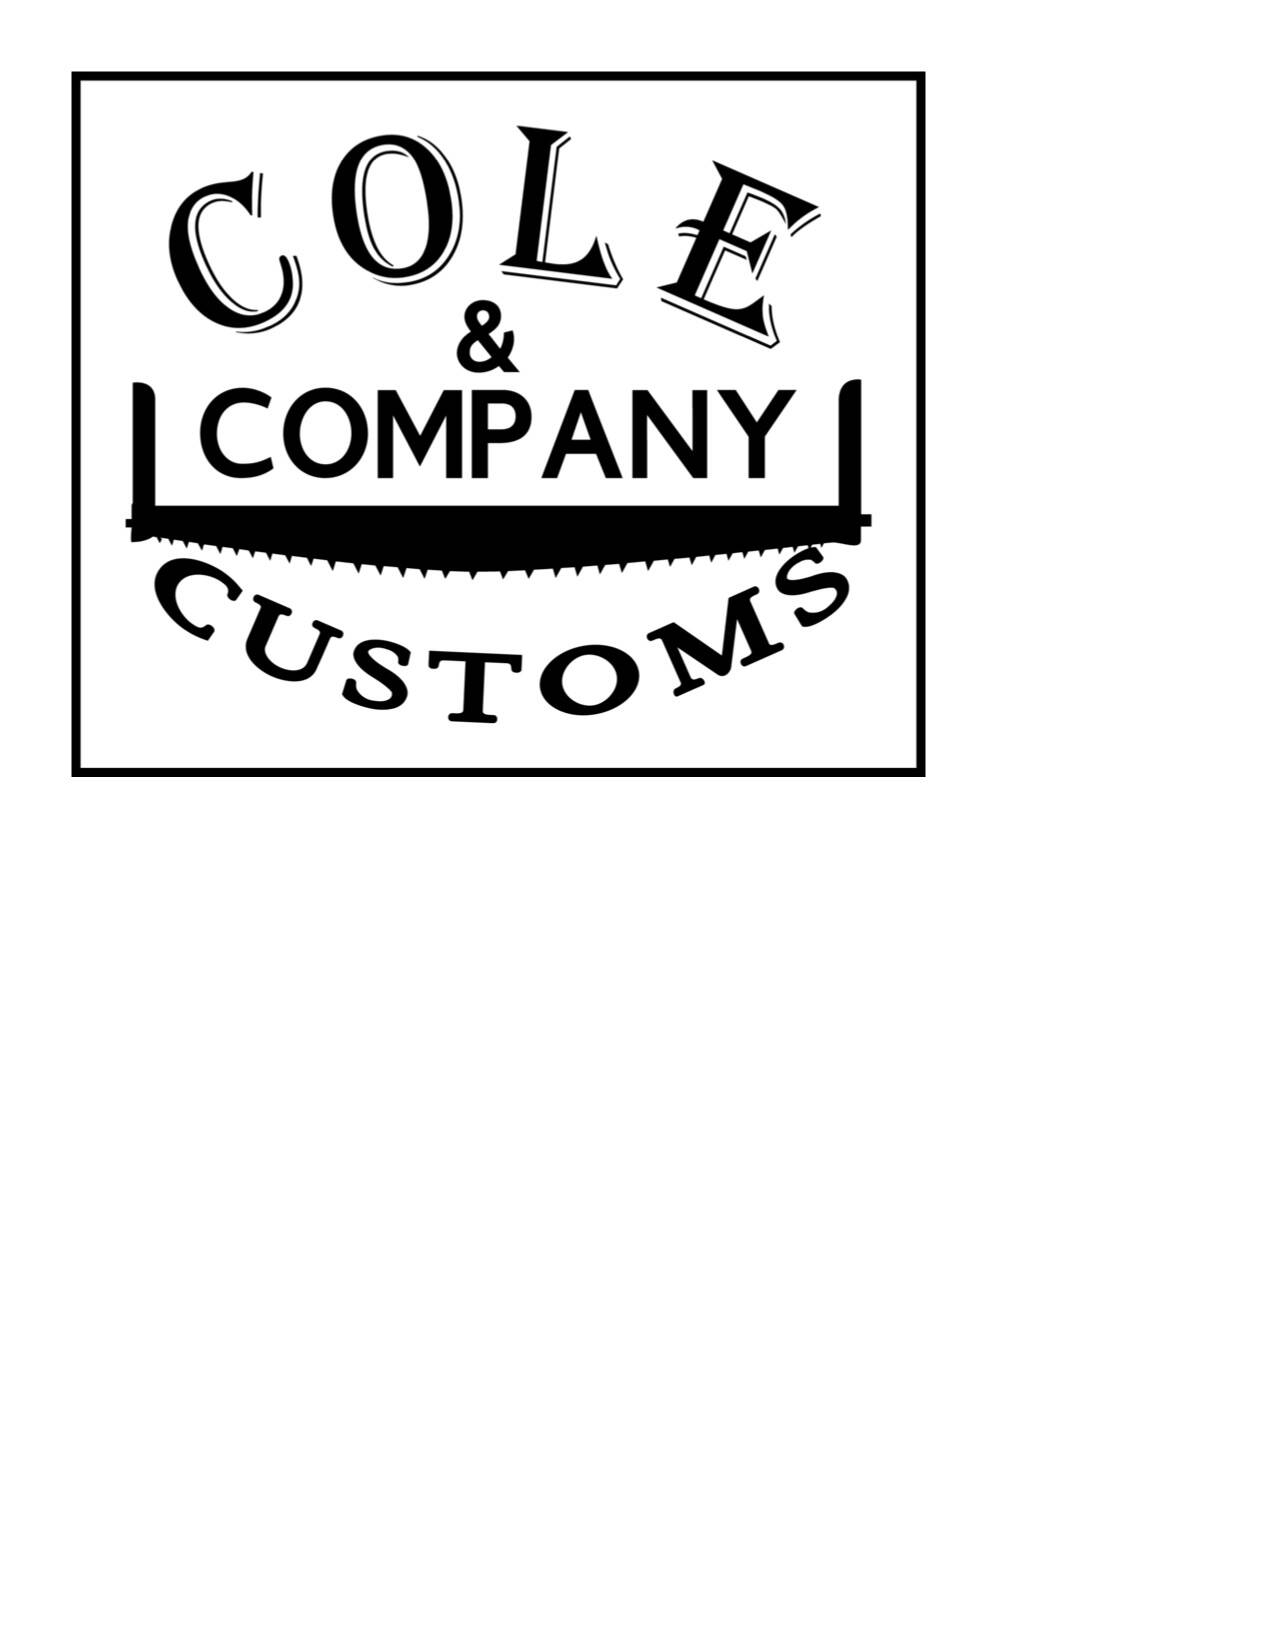 Cole and Company Customs